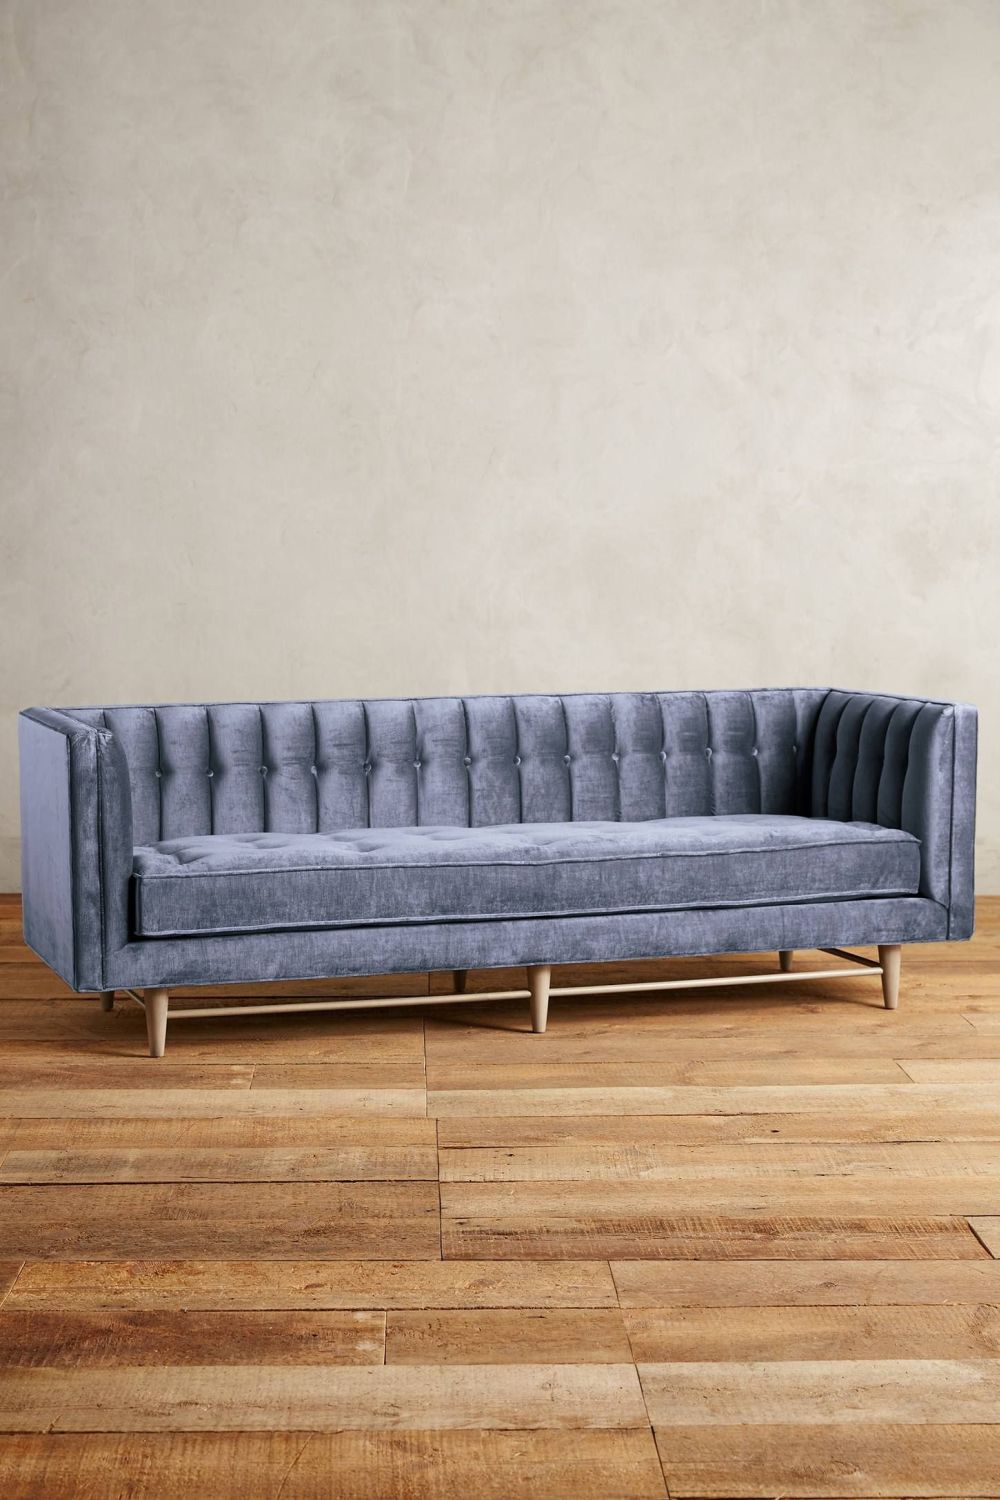 velvet sofa for beautiful wood flooring the great seating debate about sofa versus couch: which one is better